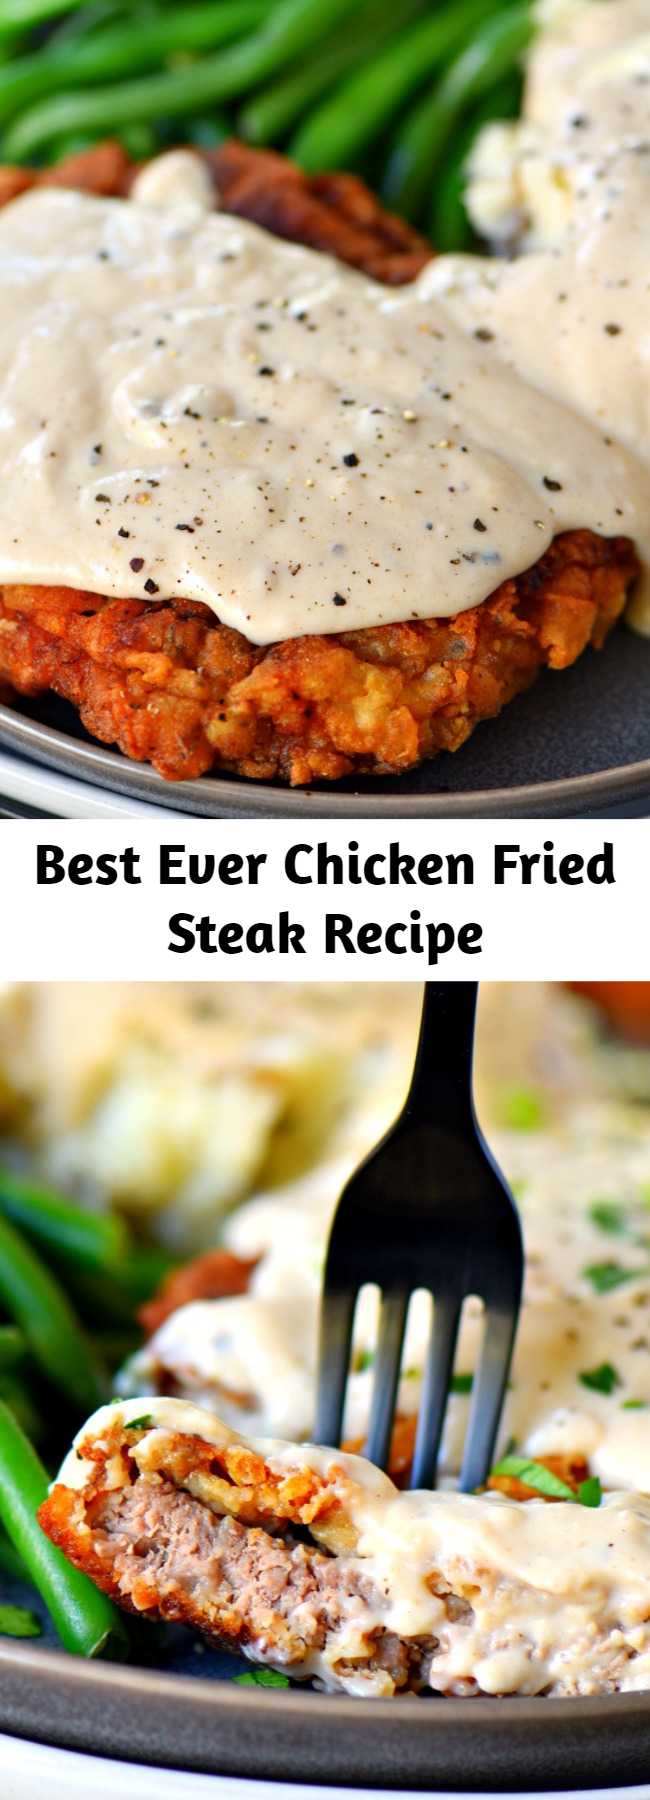 Best Ever Chicken Fried Steak Recipe - This Chicken Fried Steak is fried to golden perfection and topped with the creamiest gravy you can imagine. It's hard to imagine a more quintessential Southern meal. The hard part is deciding whether you want to make it for breakfast or dinner. My family can't get enough of these tender steaks with that delightful crispy, crunchy coating. And the gravy? Heaven! #chickenfriedsteak #dinner #recipe #entree #gravy #steak #recipes